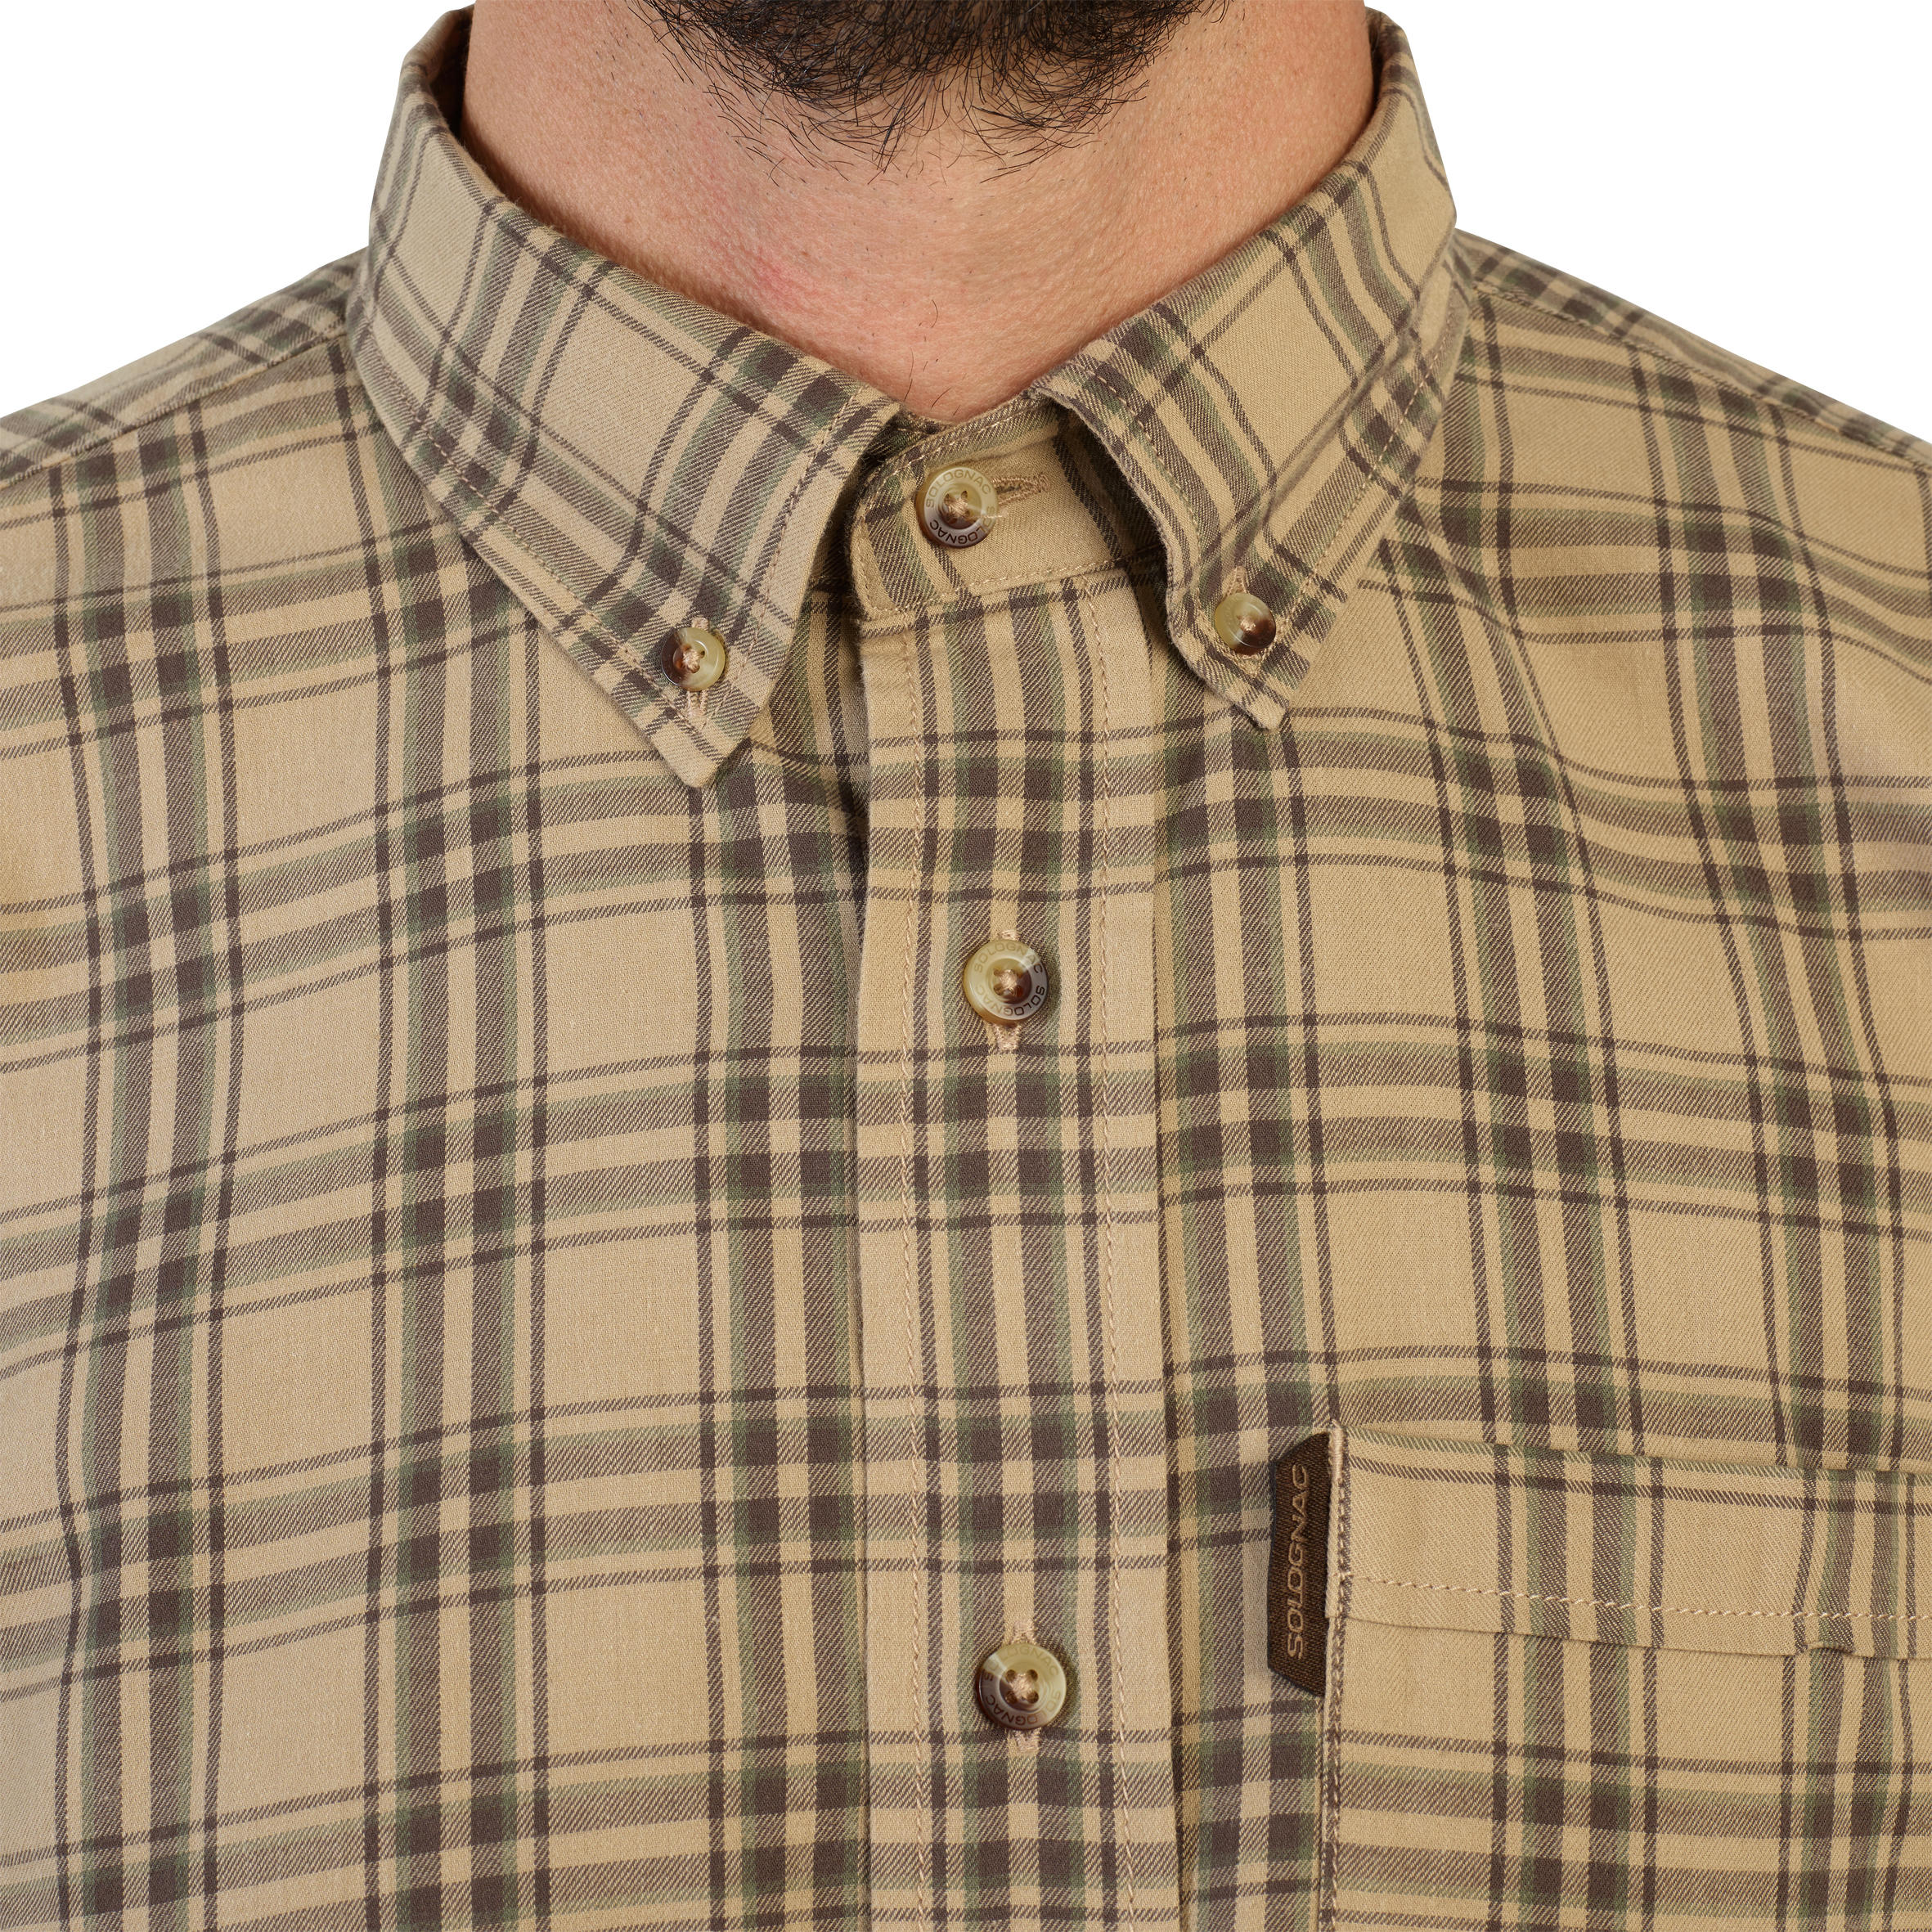 G.H. Bass & Co. Breathable Button-front Shirts for Men